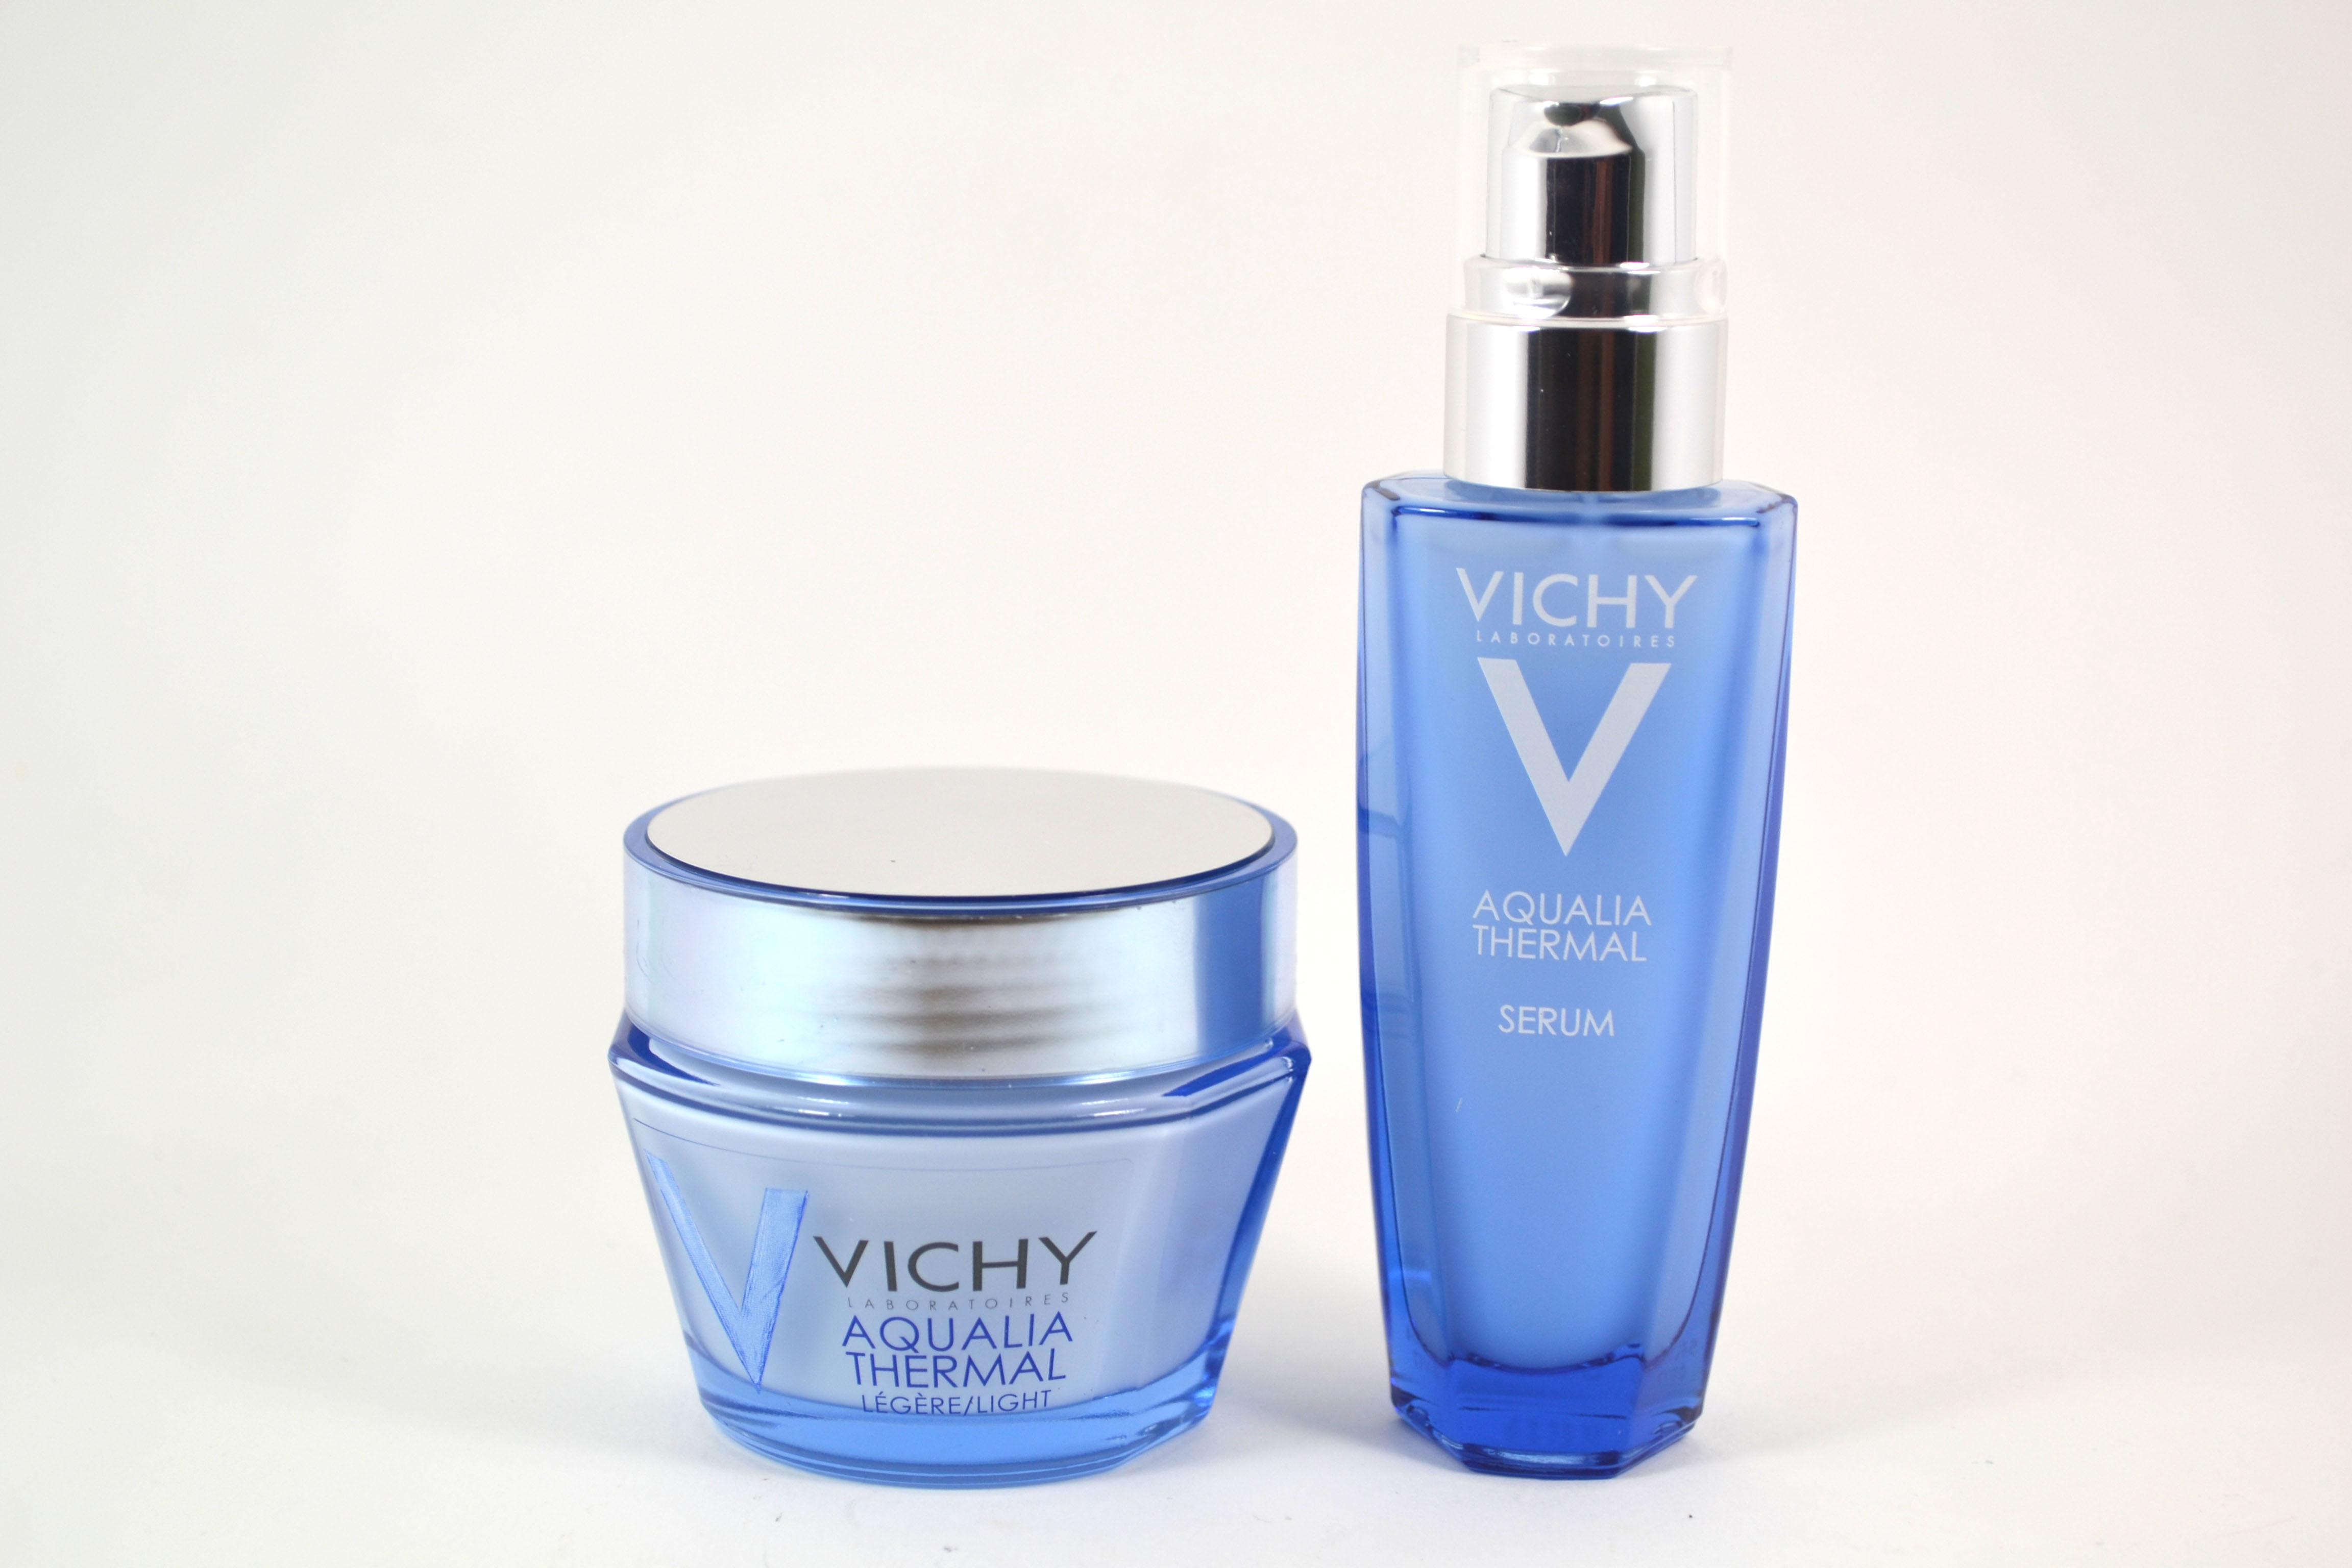 Vichy Aqualia Thermal Review and Swatches